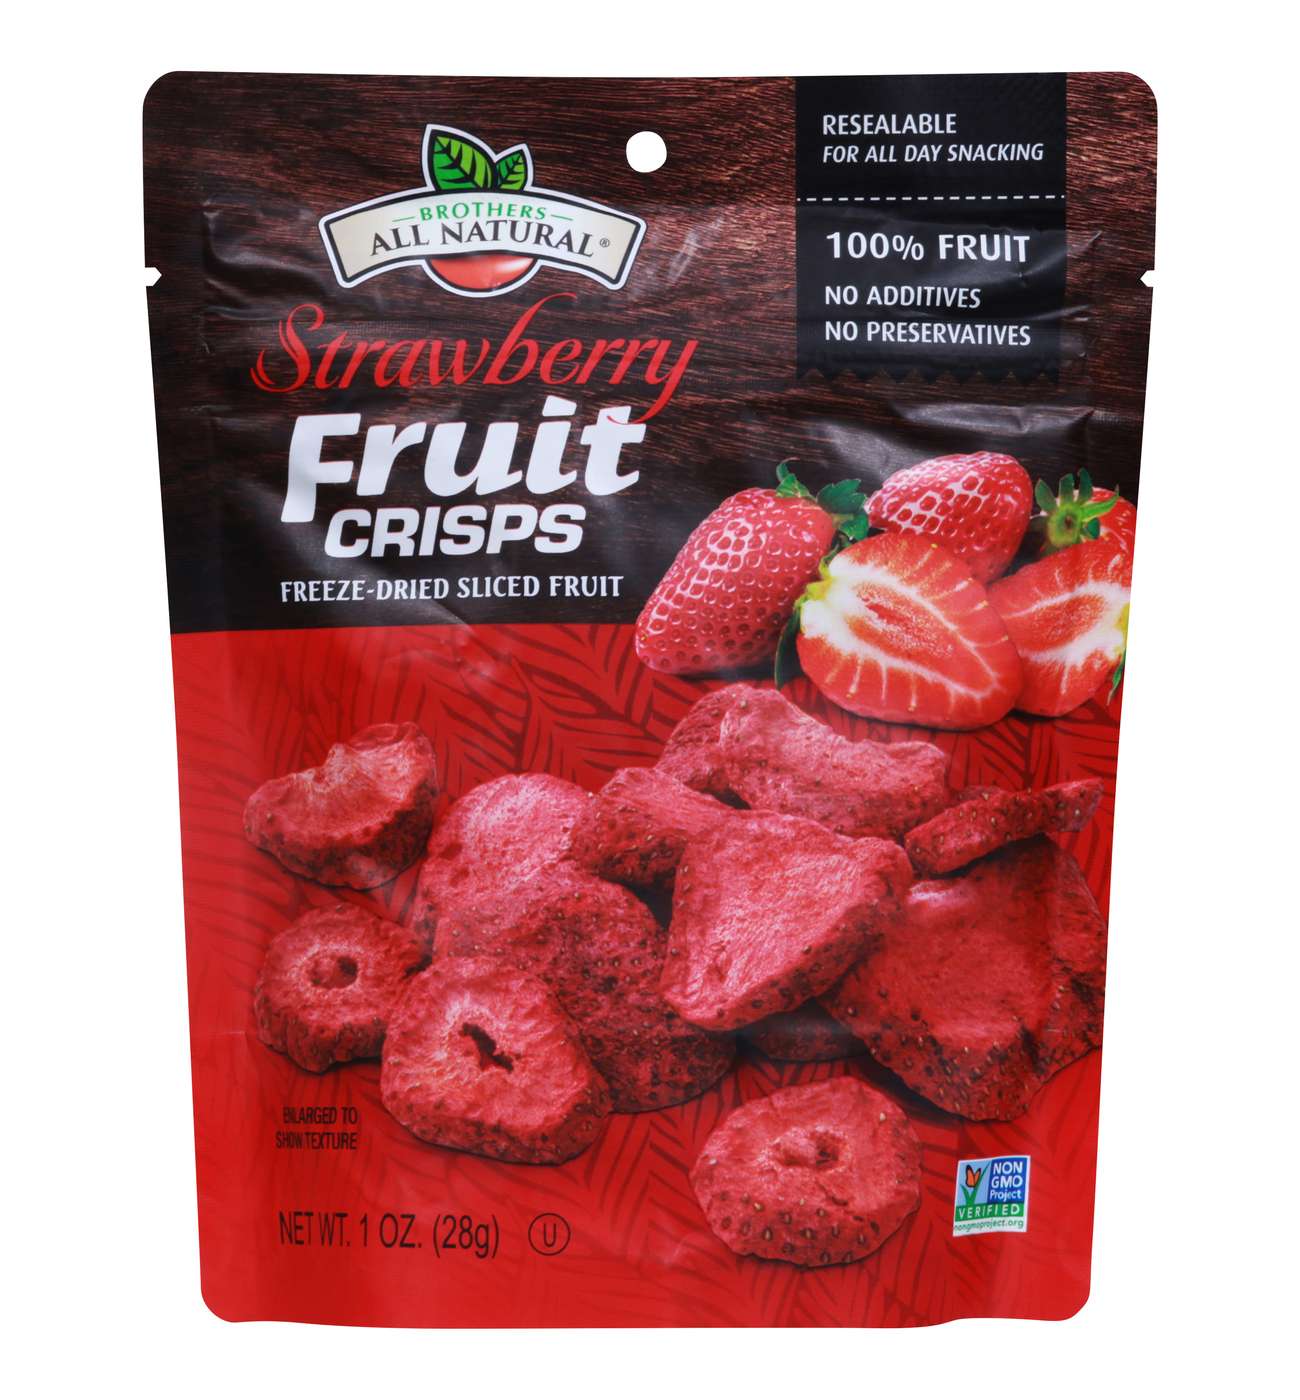 Brothers All Natural Strawberry Fruit Crisps; image 1 of 3